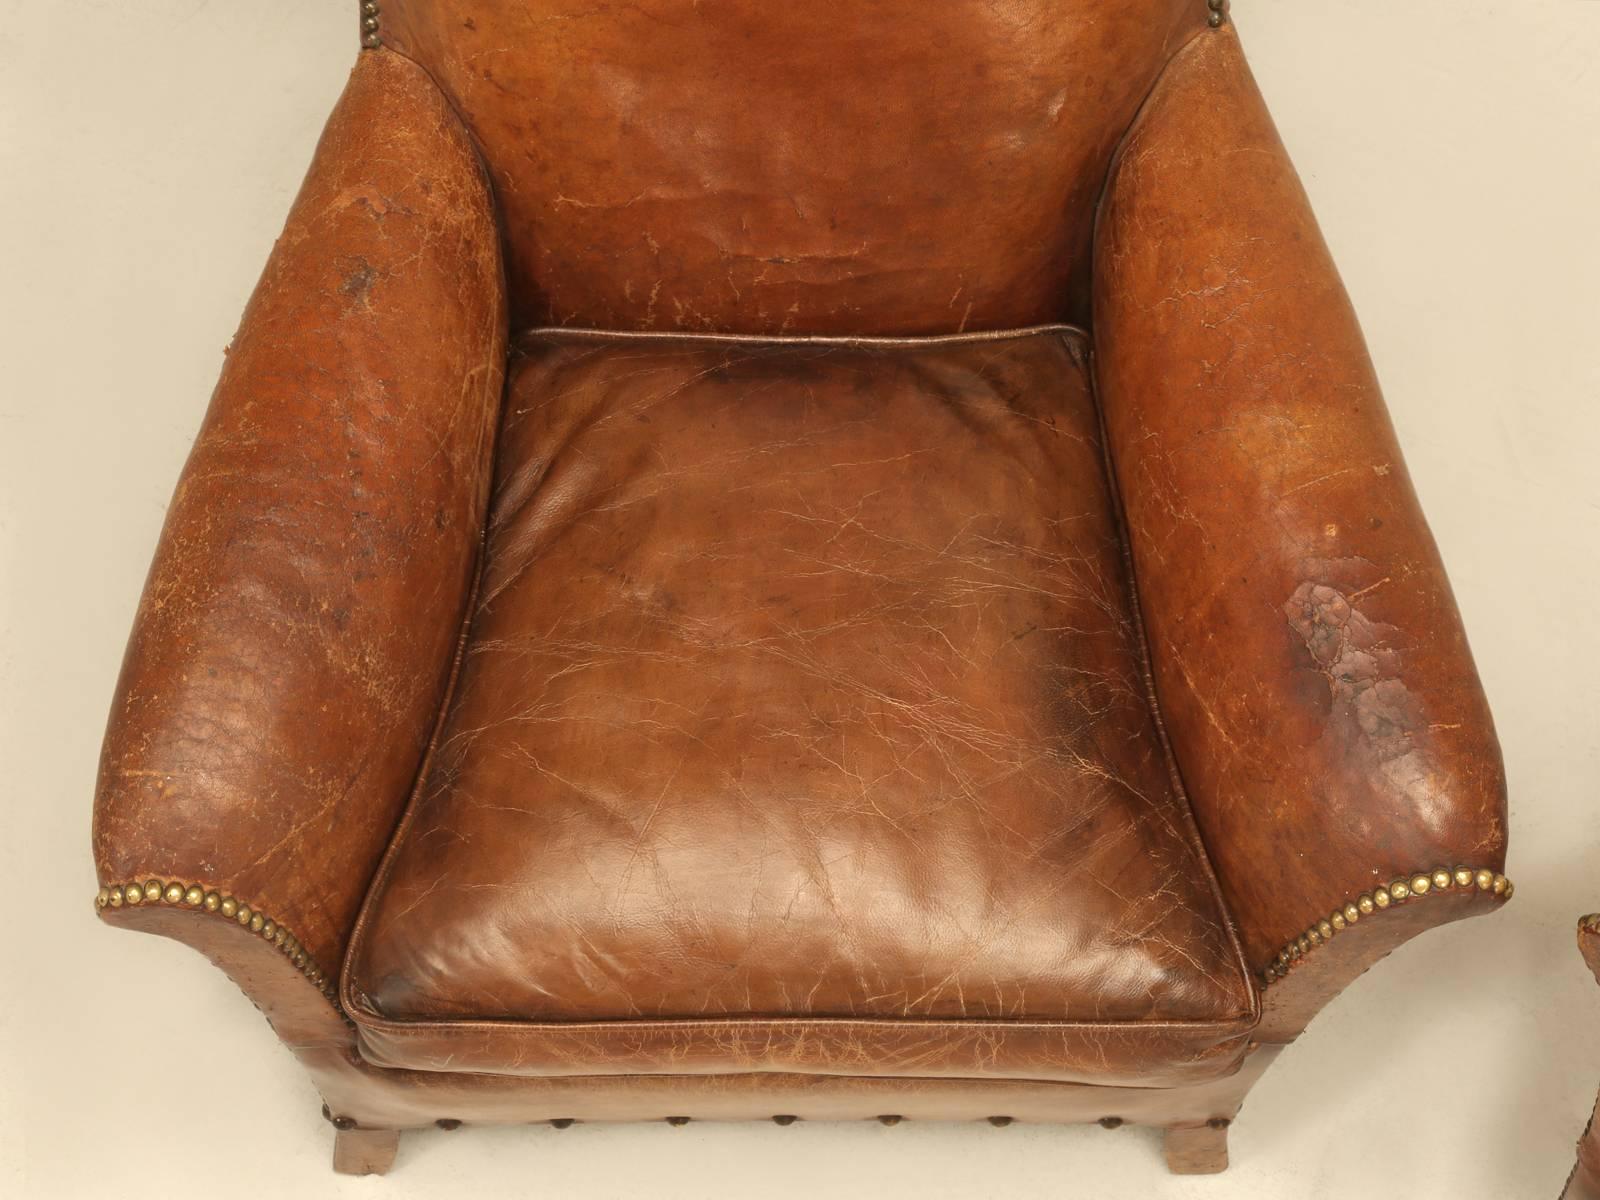 Early 20th Century French Art Deco Leather Club Chairs, Original Leather and Fully Restored 